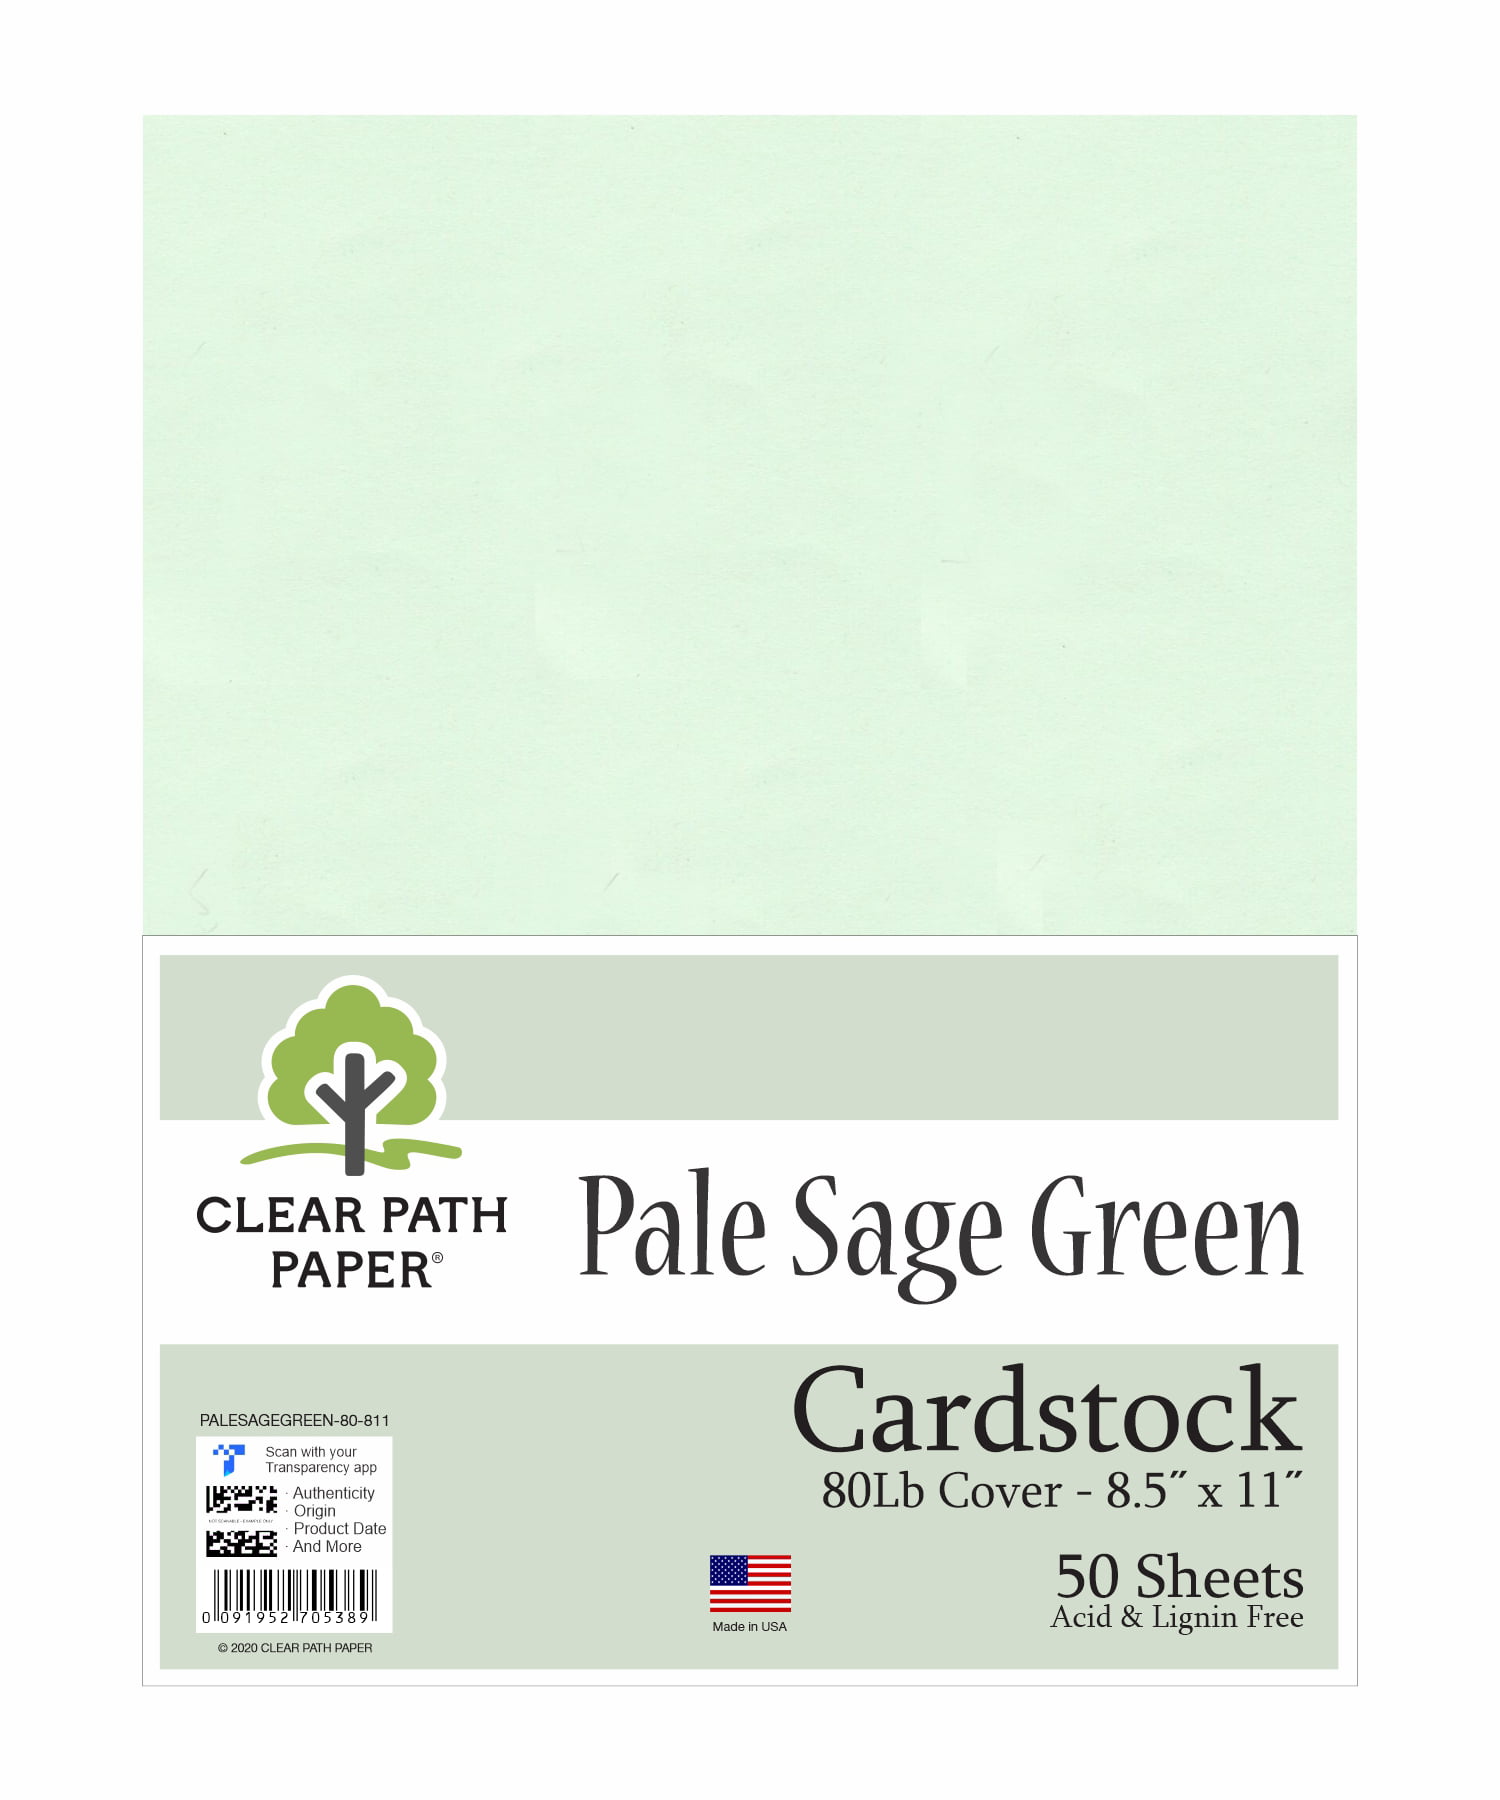 80 lb Cardstock Sale - Glo-Tone Collection